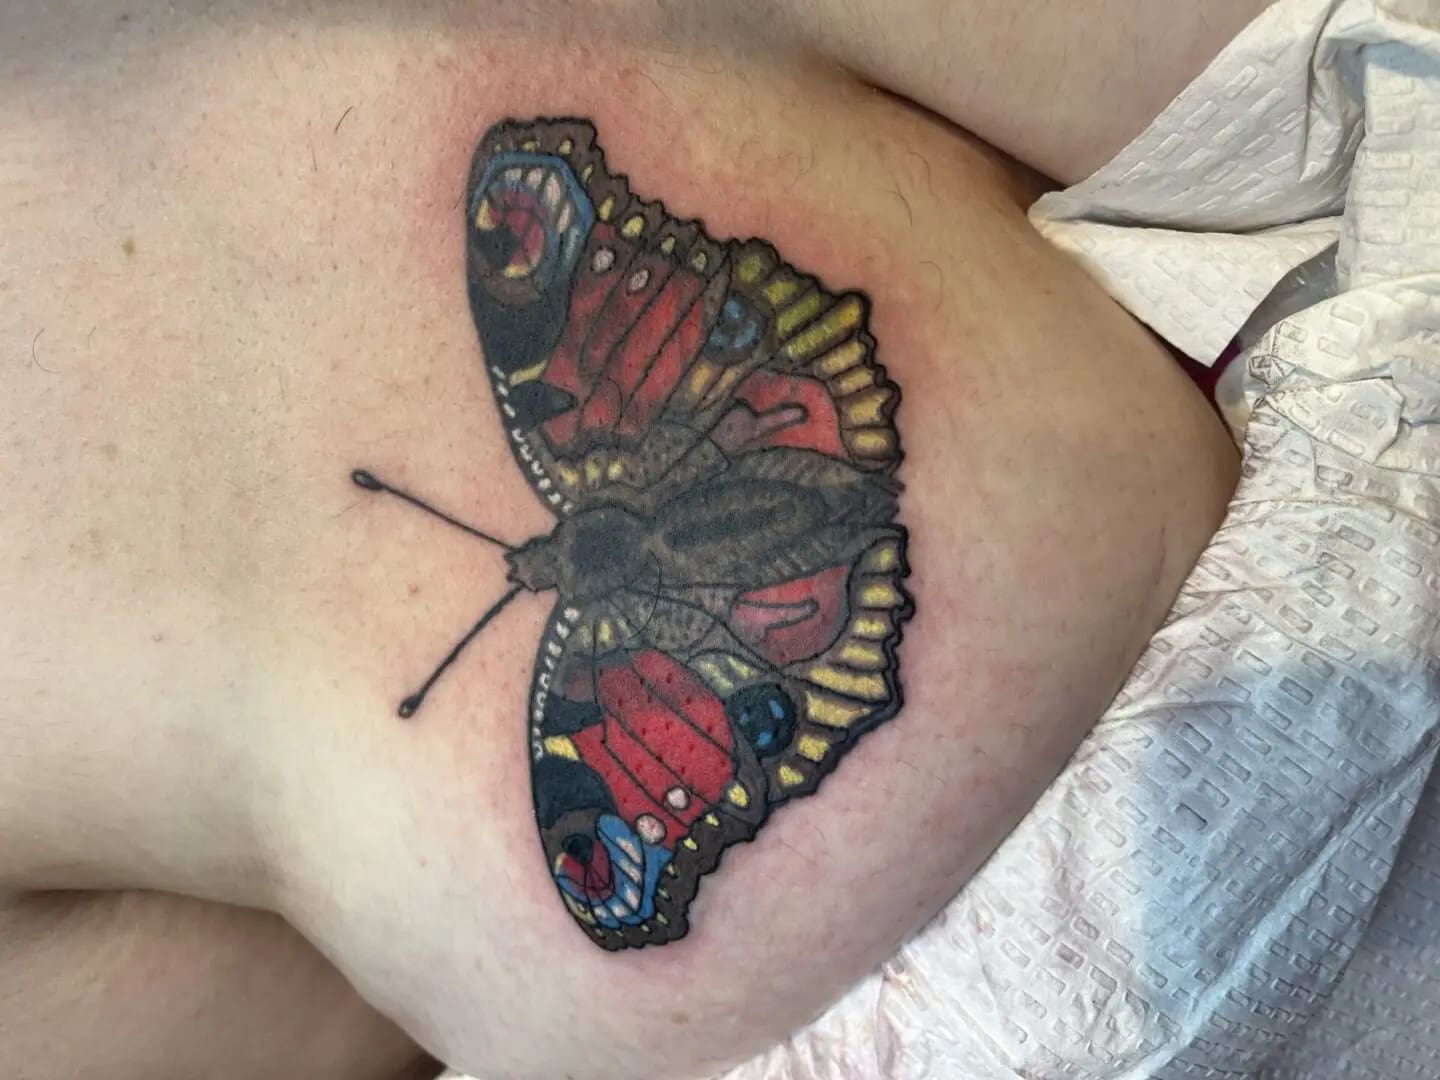 A butterfly tattoo is shown on the back of a woman.